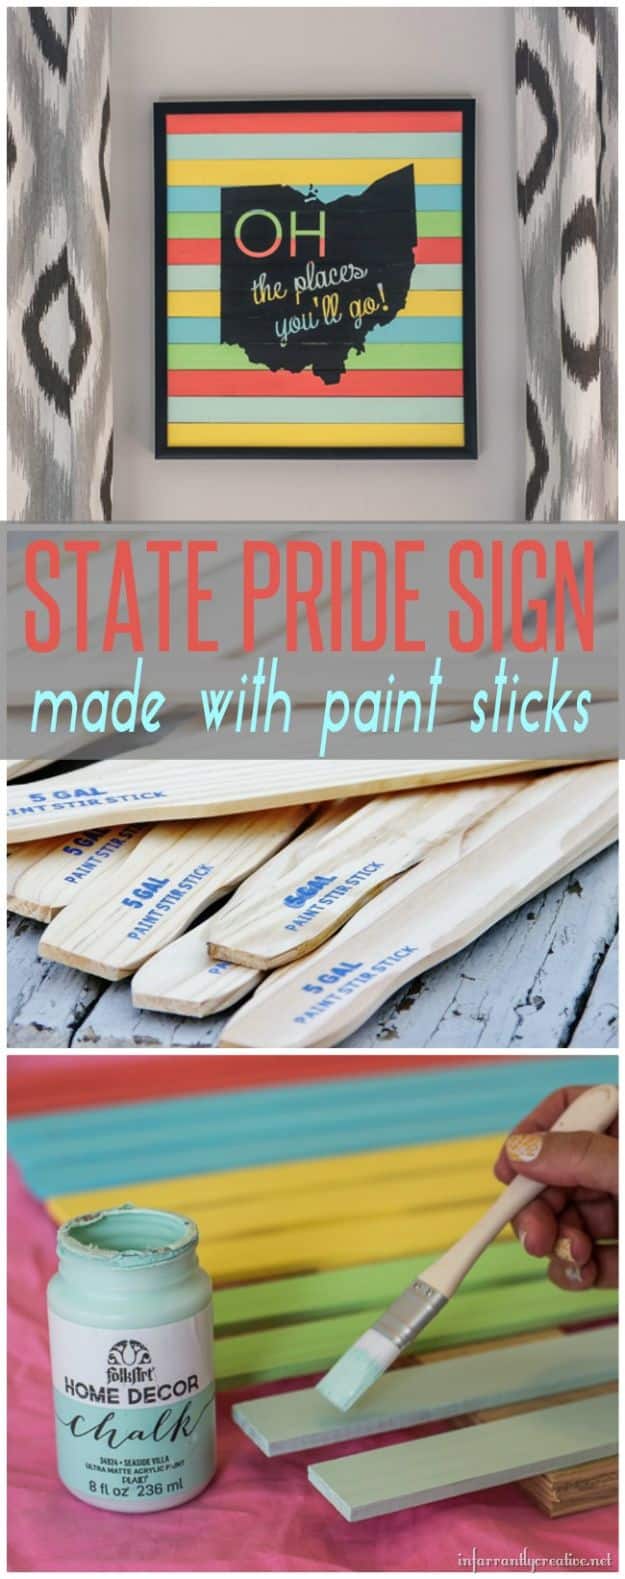 Cool State Crafts - DIY Paint Stick State Sign - Easy Craft Projects To Show Your Love For Your Home State - Best DIY Ideas Using Maps, String Art Shaped Like States, Quotes, Sayings and Wall Art Ideas, Painted Canvases, Cute Pillows, Fun Gifts and DIY Decor Made Simple - Creative Decorating Ideas for Living Room, Kitchen, Bedroom, Bath and Porch http://diyjoy.com/cool-state-crafts